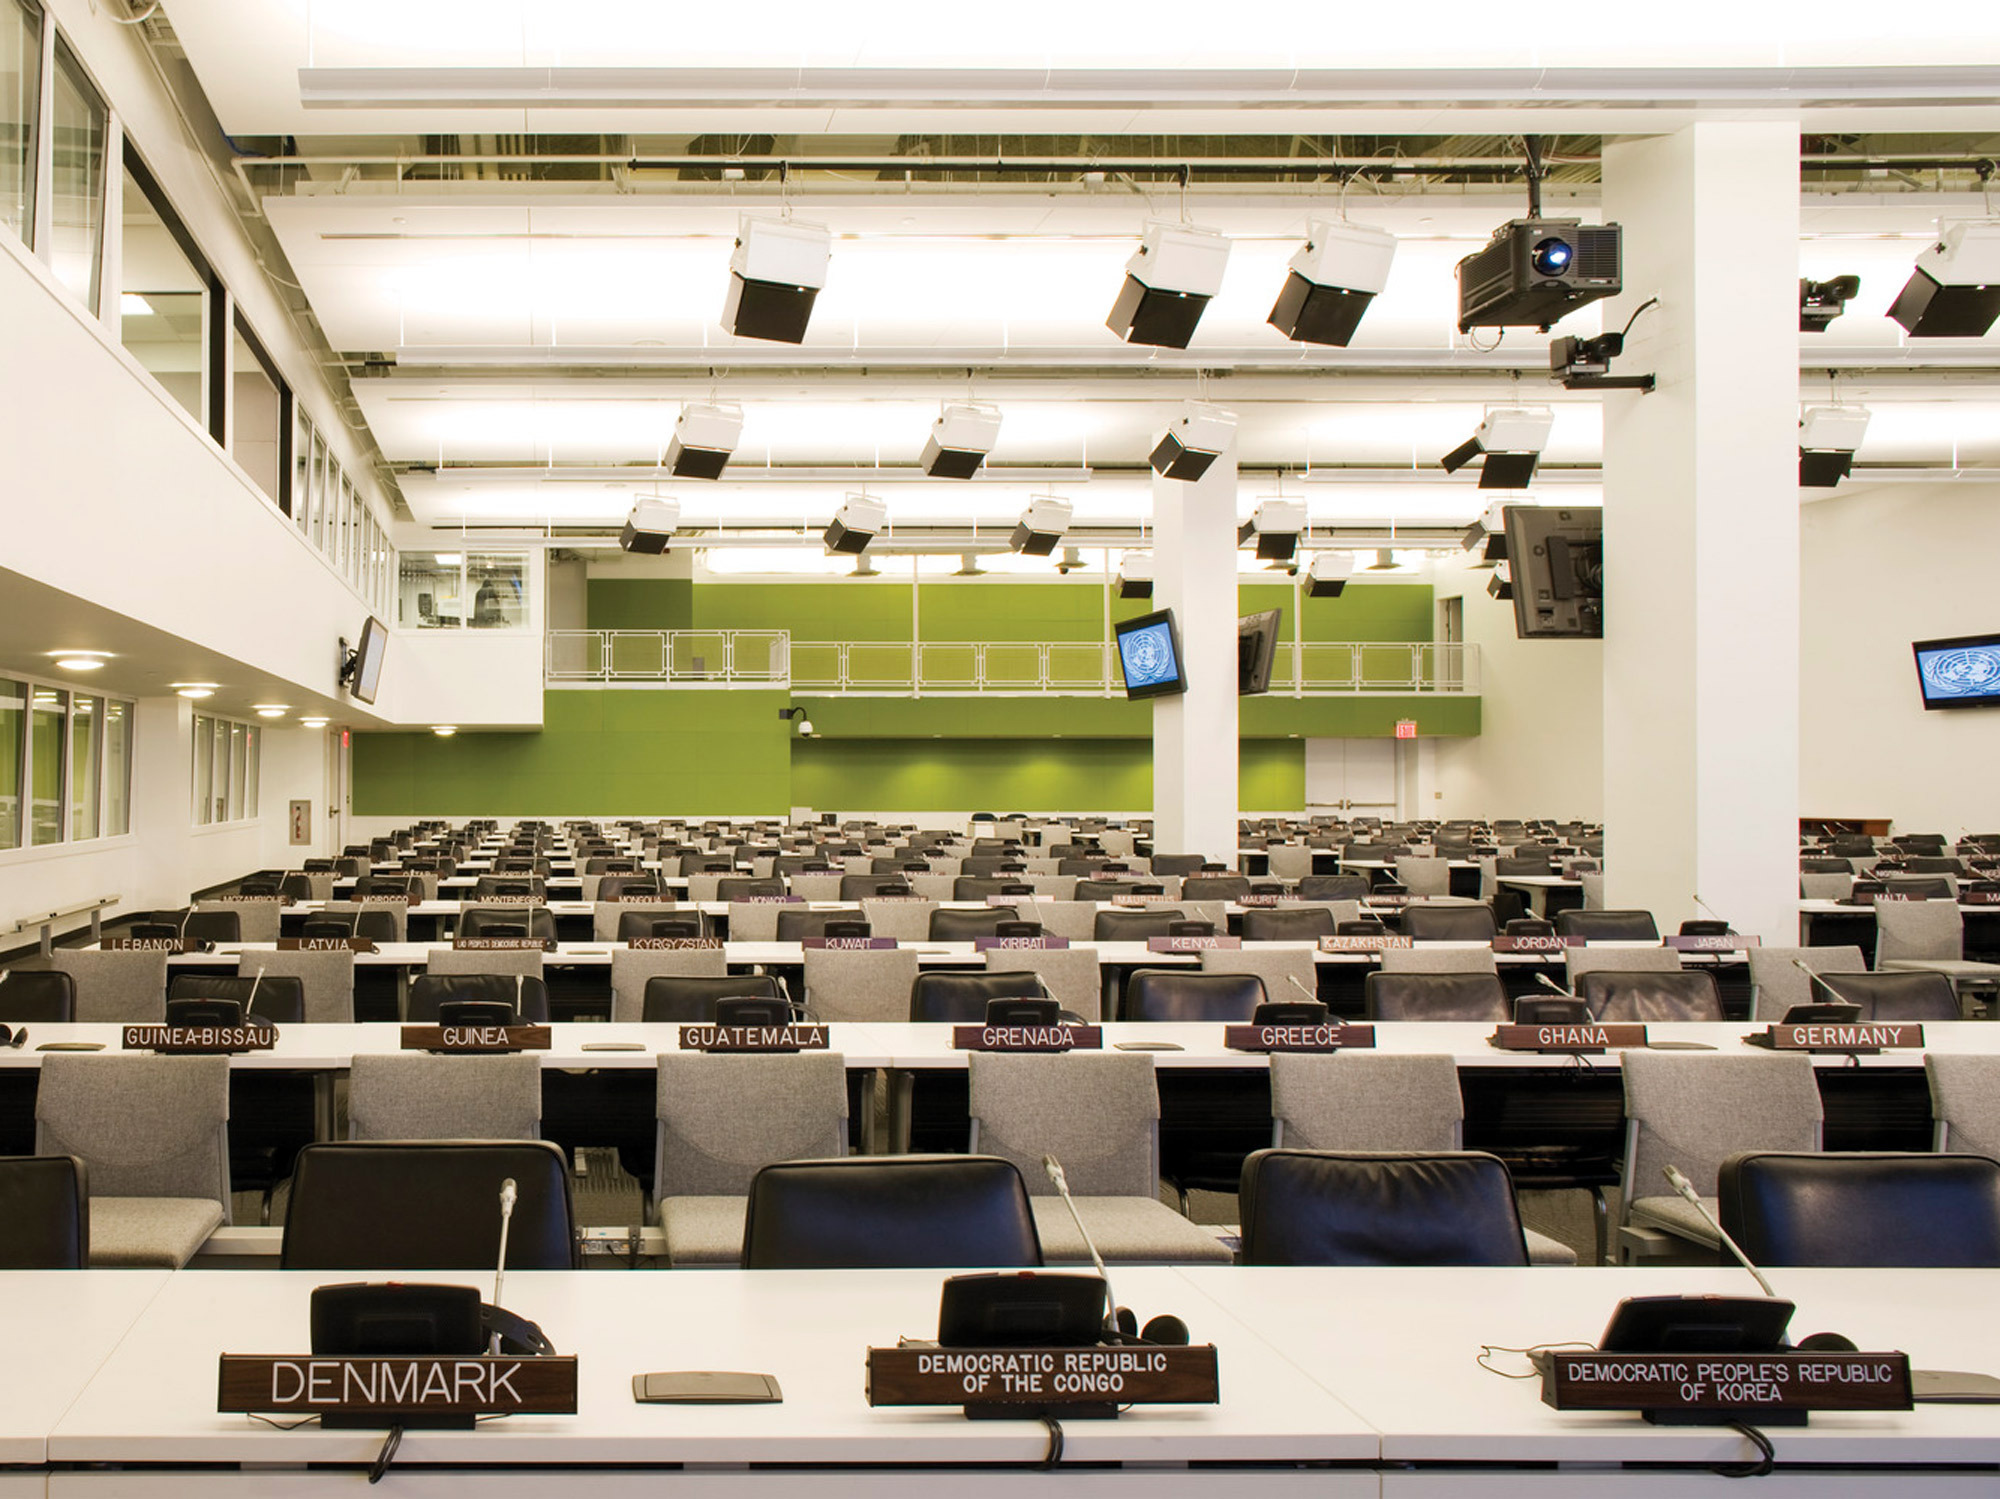 Modern lecture hall featuring tiered seating with individual workstations, built-in audiovisual equipment, and country nameplates in front of each row reflecting a model United Nations assembly hall.